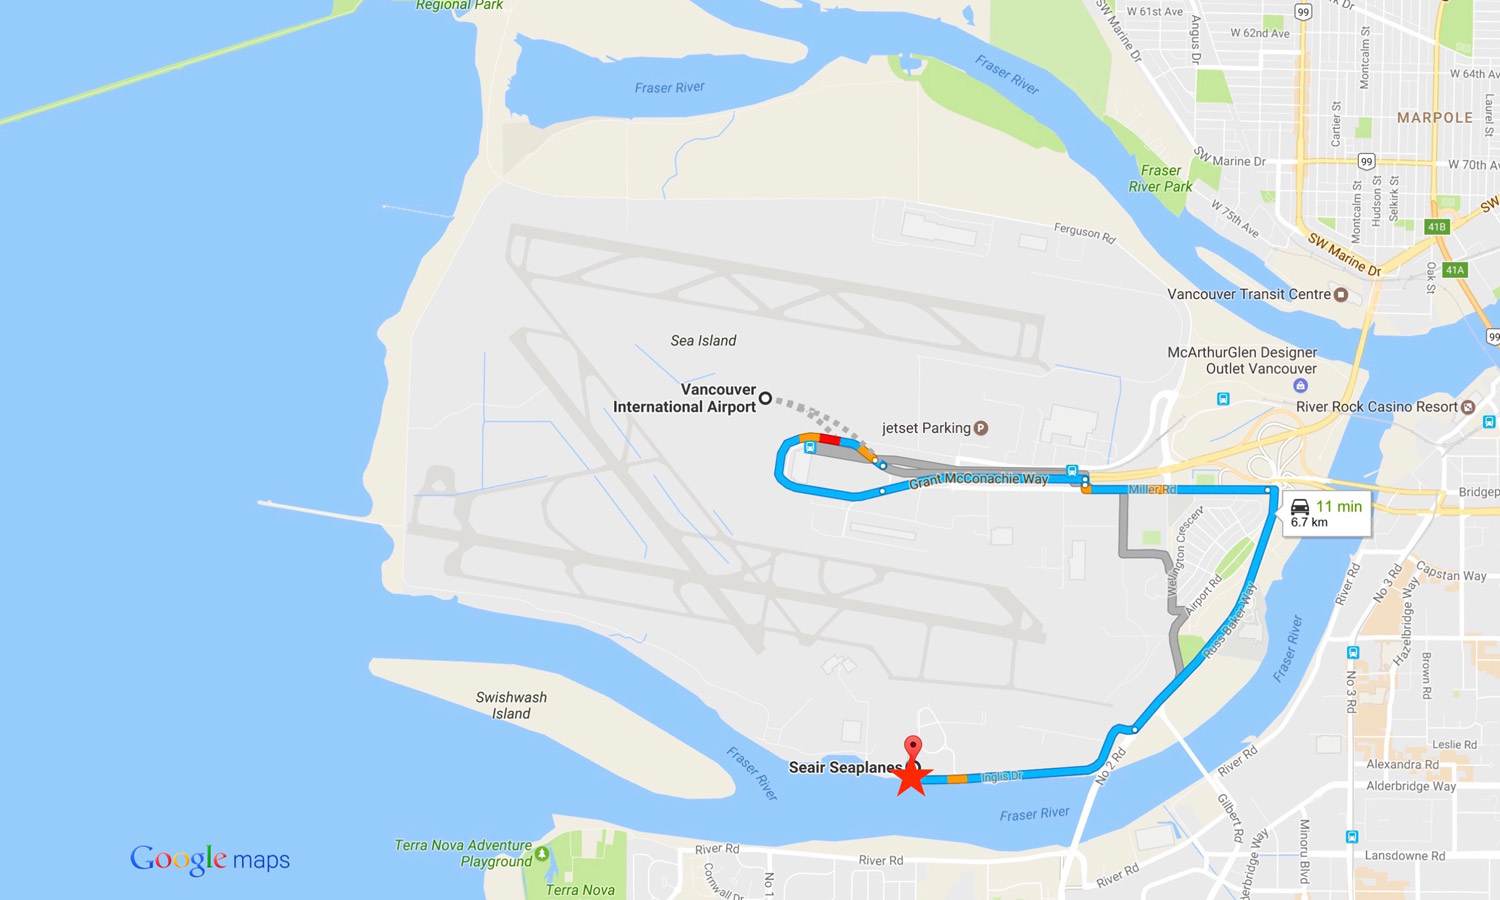 Directions from YVR to Seair